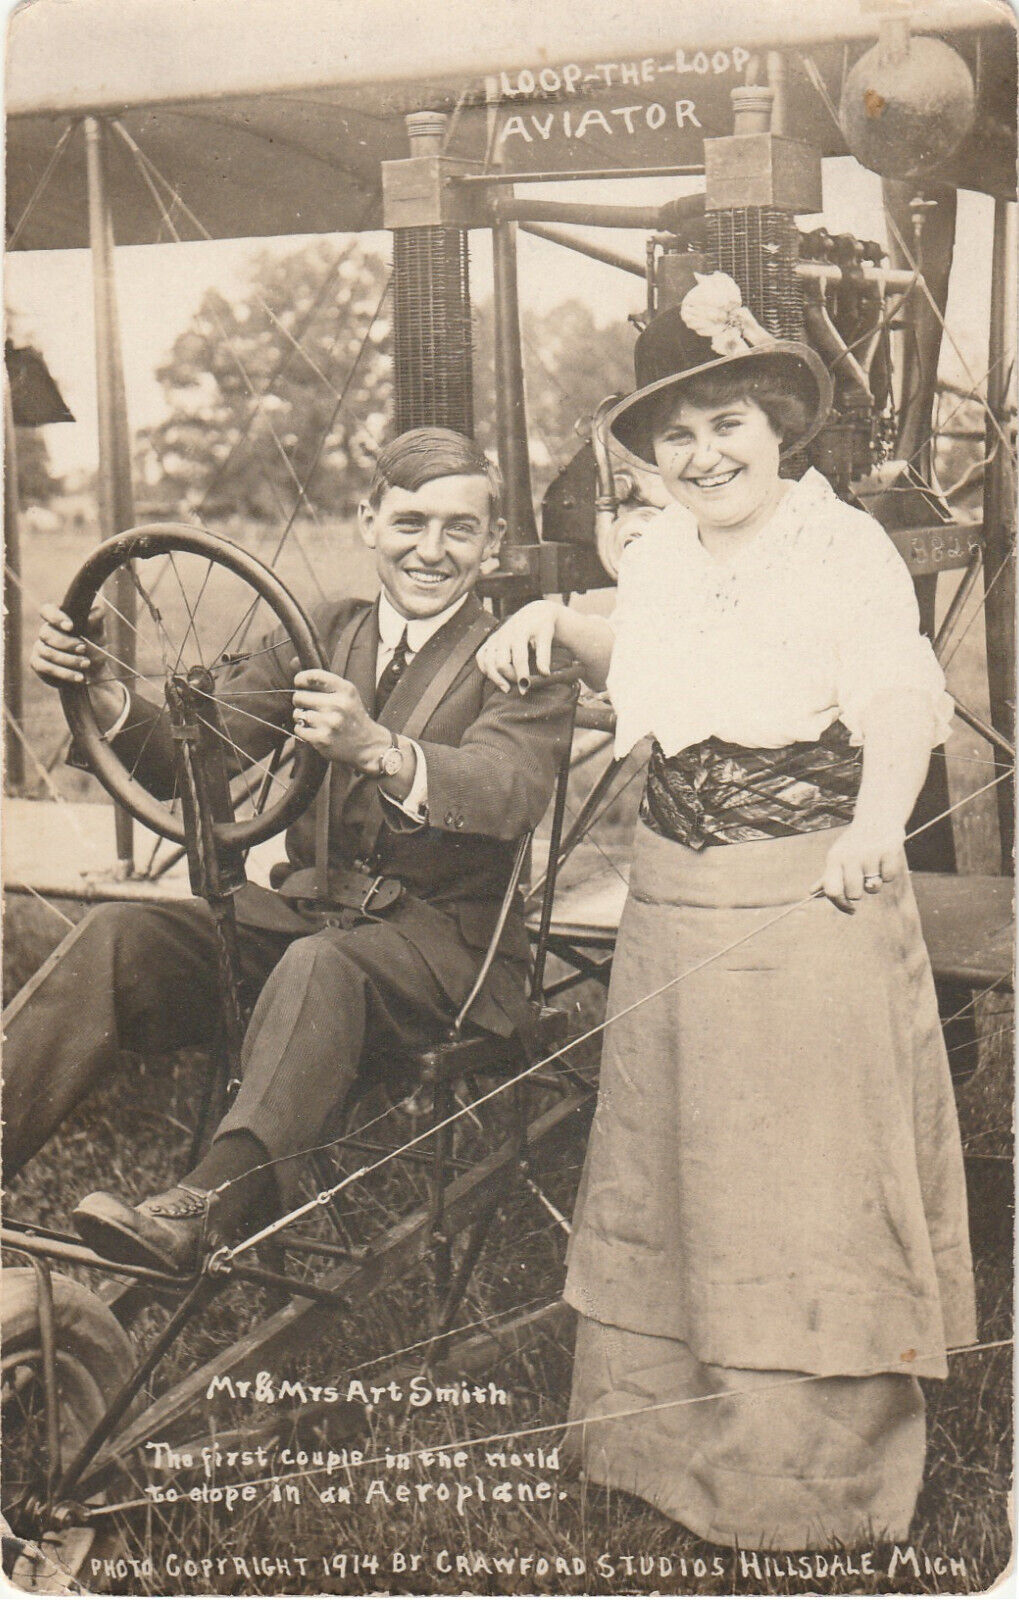 1914 pilot Art Smith & wife Amy (World's first couple to elope in an aeroplane!